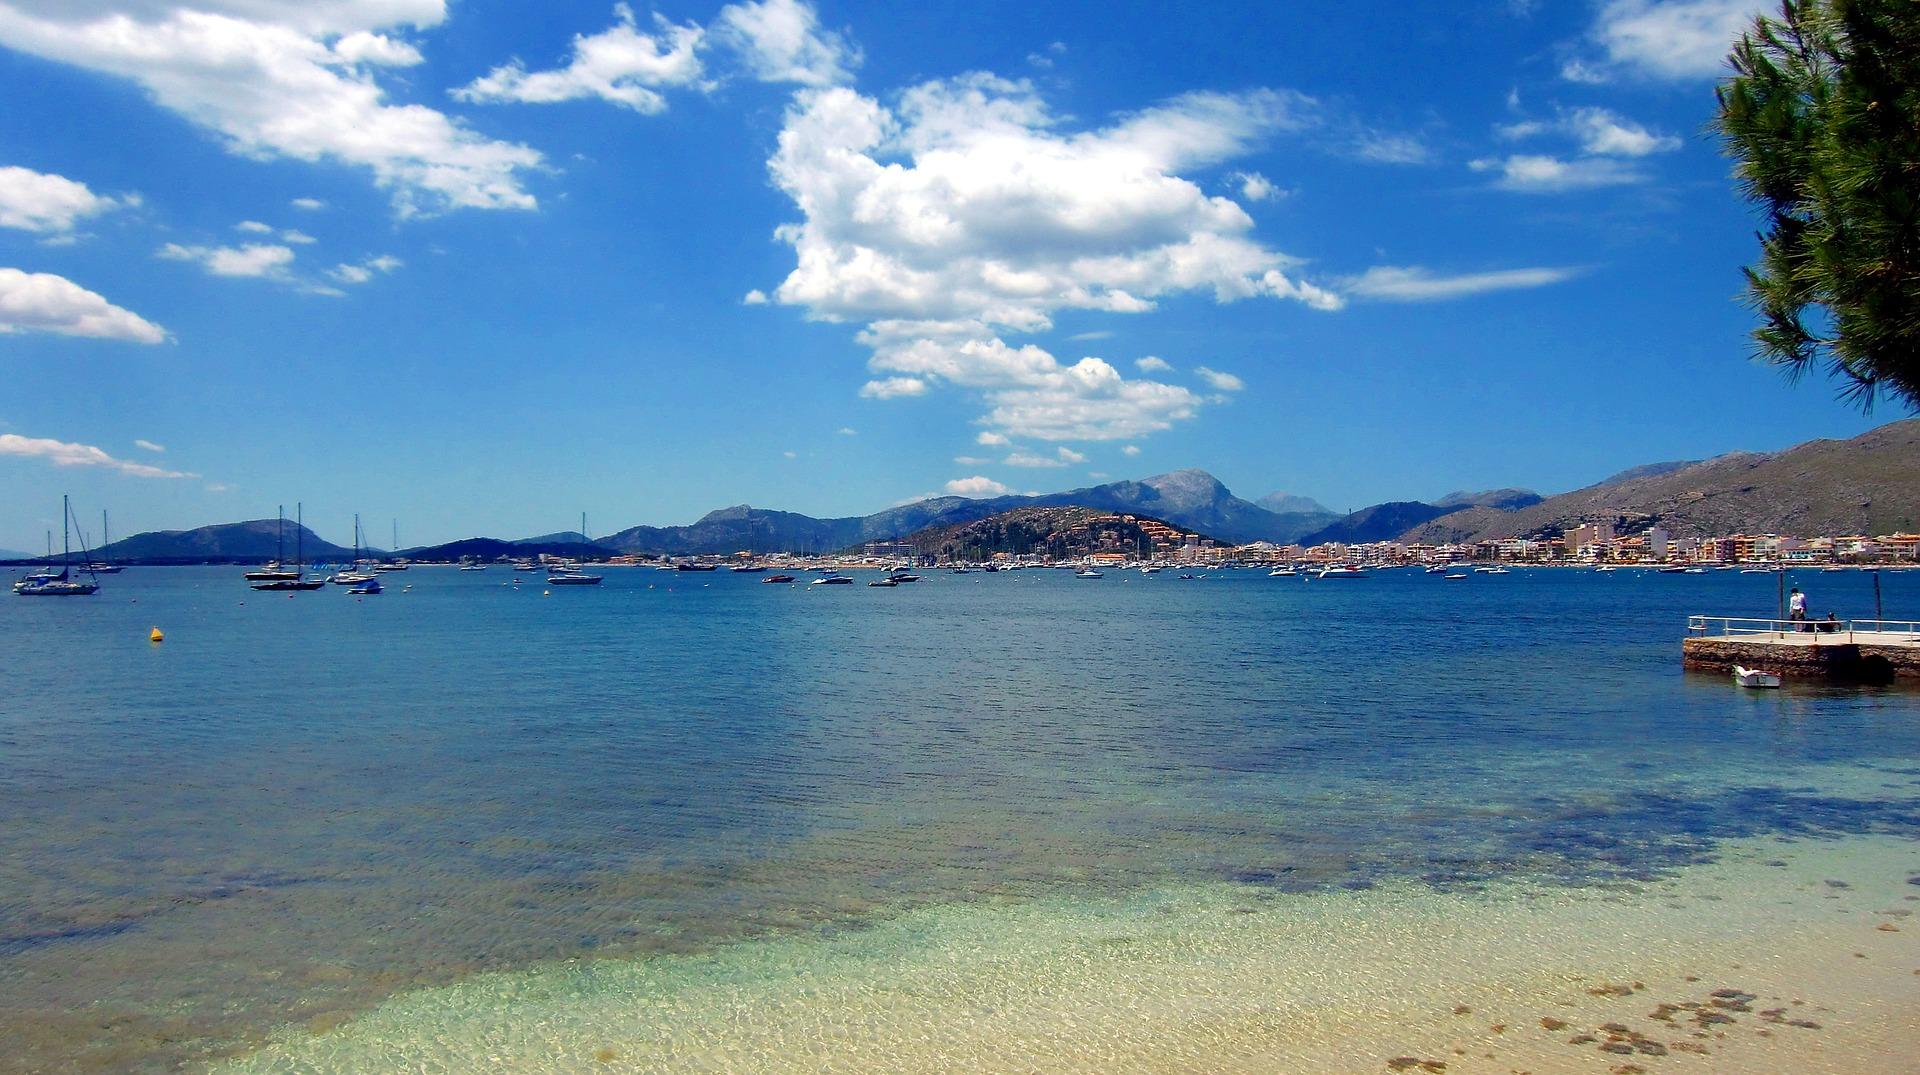 Beach and mountain range near Port de Pollença on a sunny day with some clouds